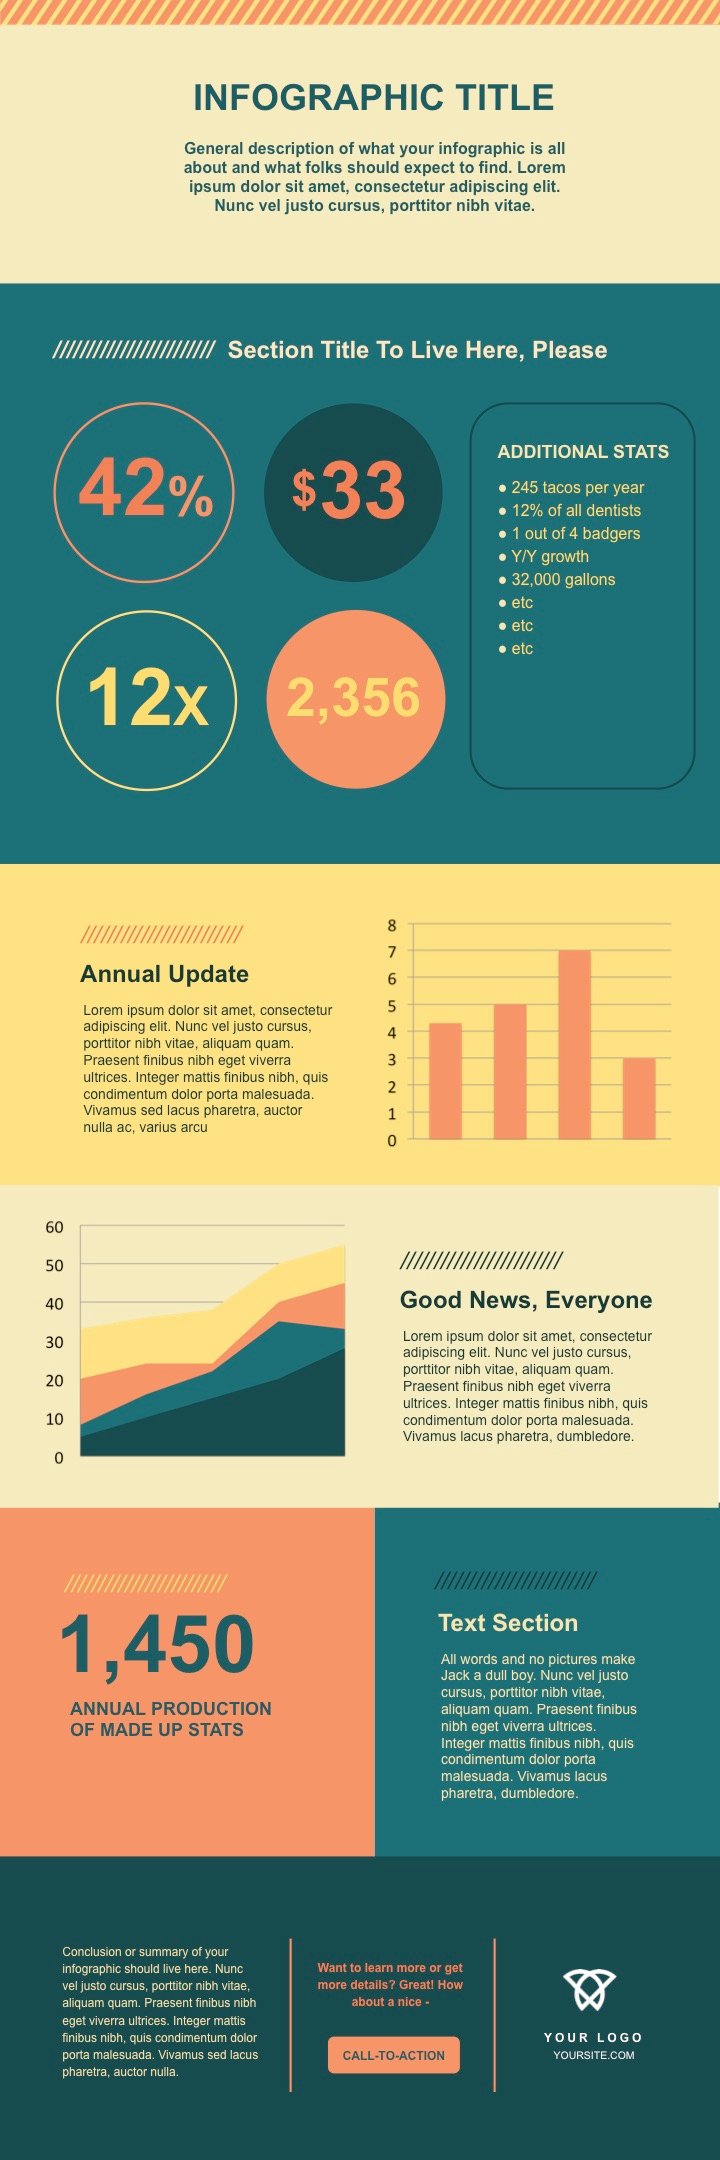 15-free-infographic-templates